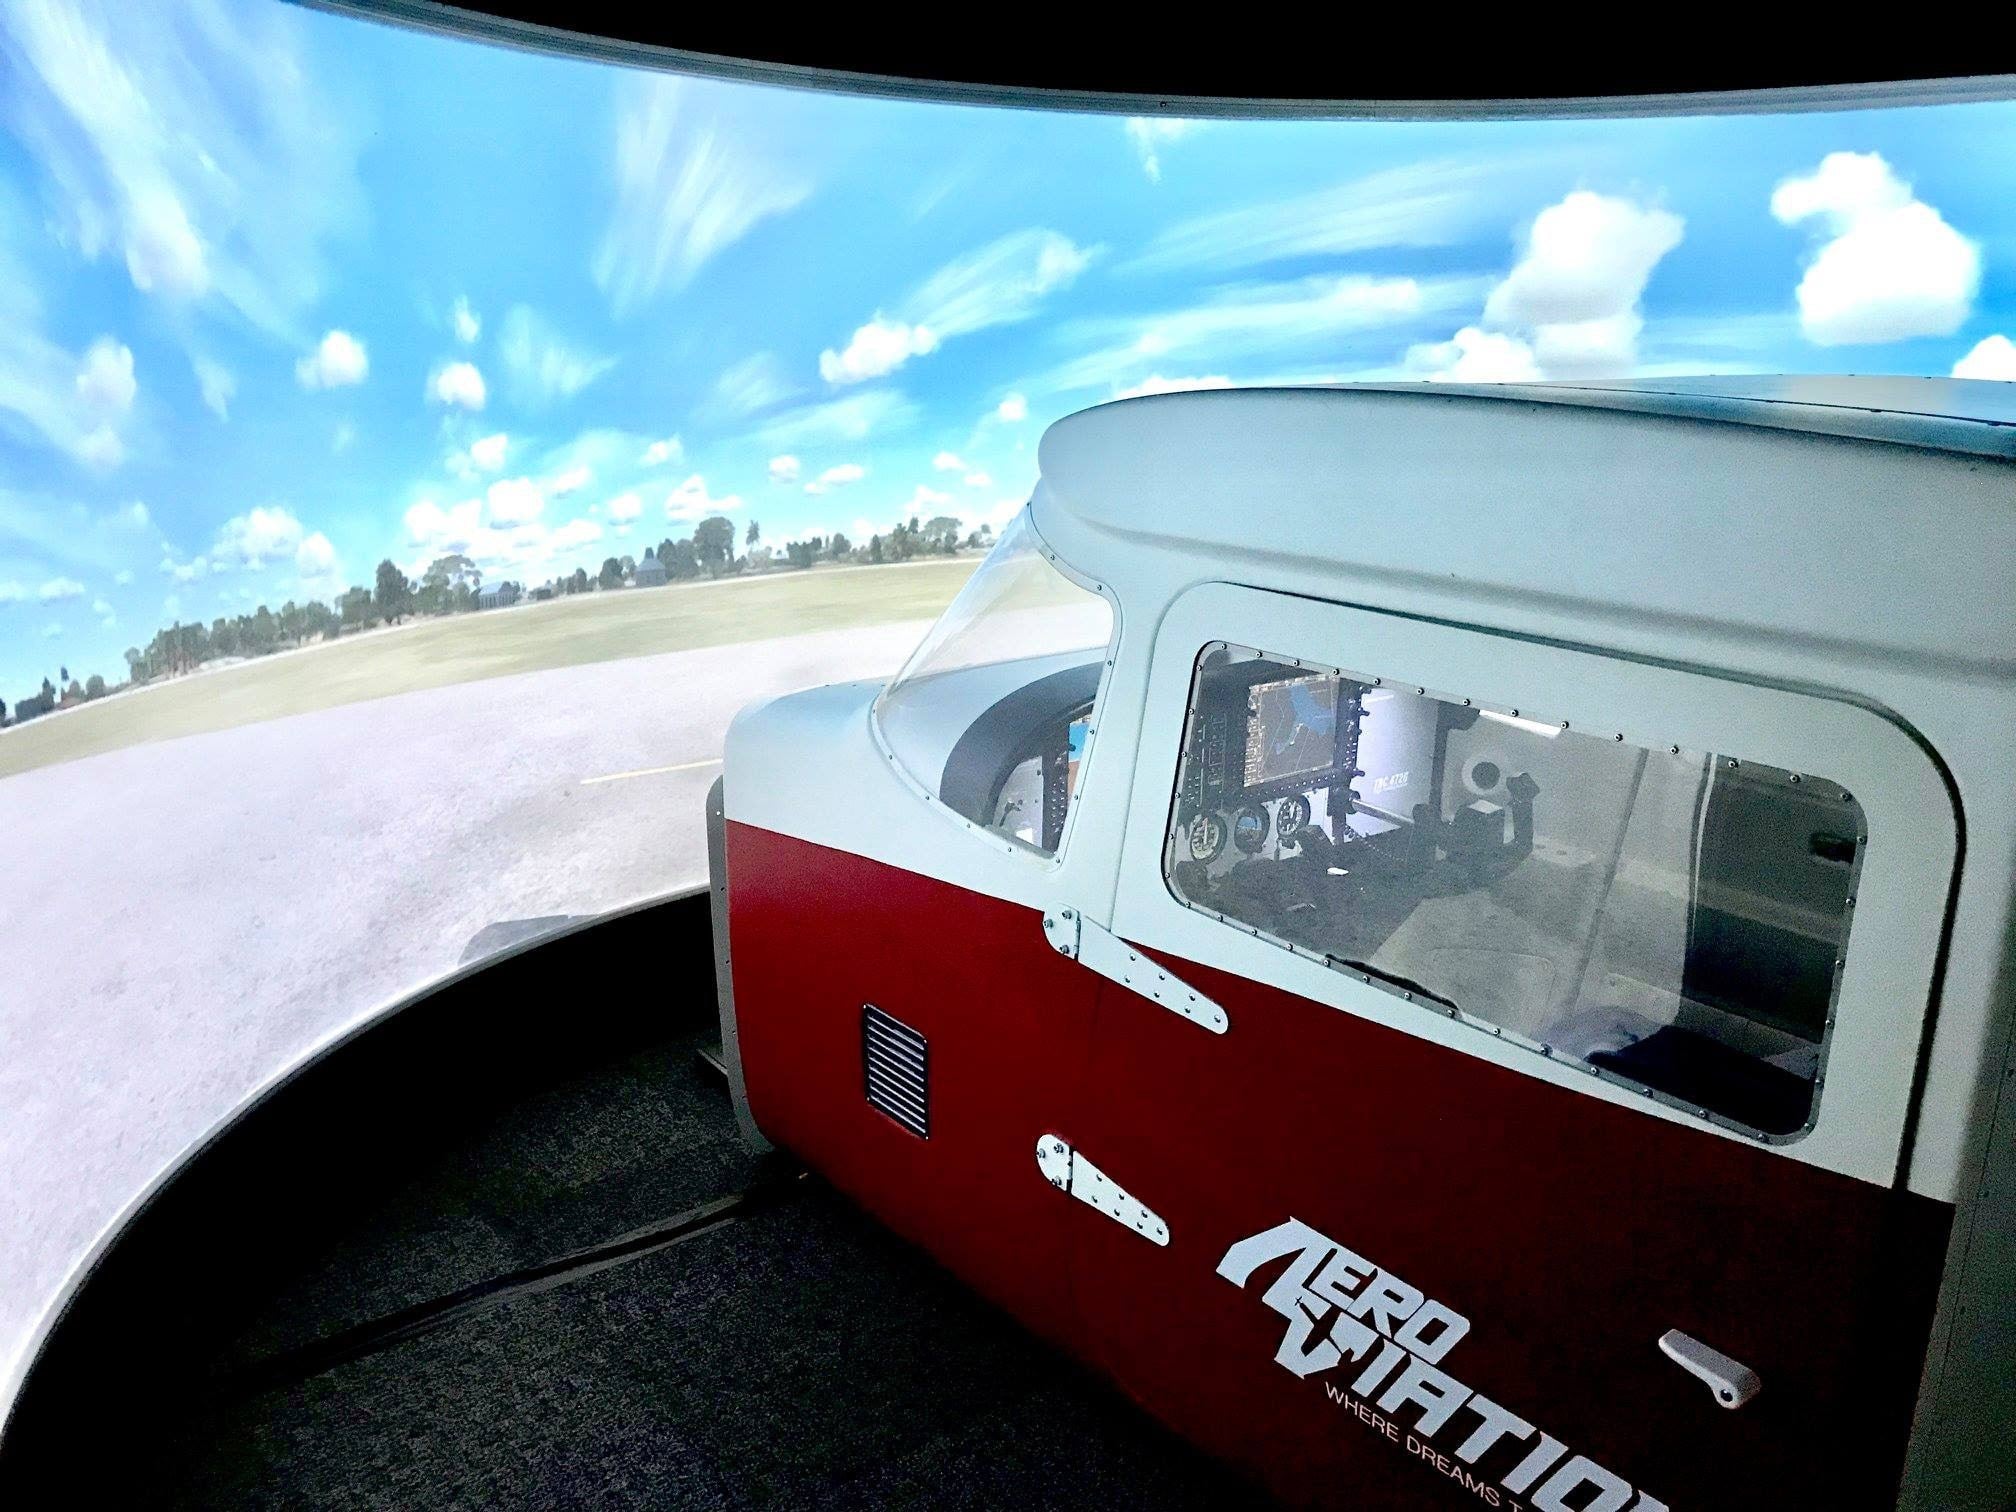 Full Flight Experience With 3 Simulators @ just $250 For 2 Pax